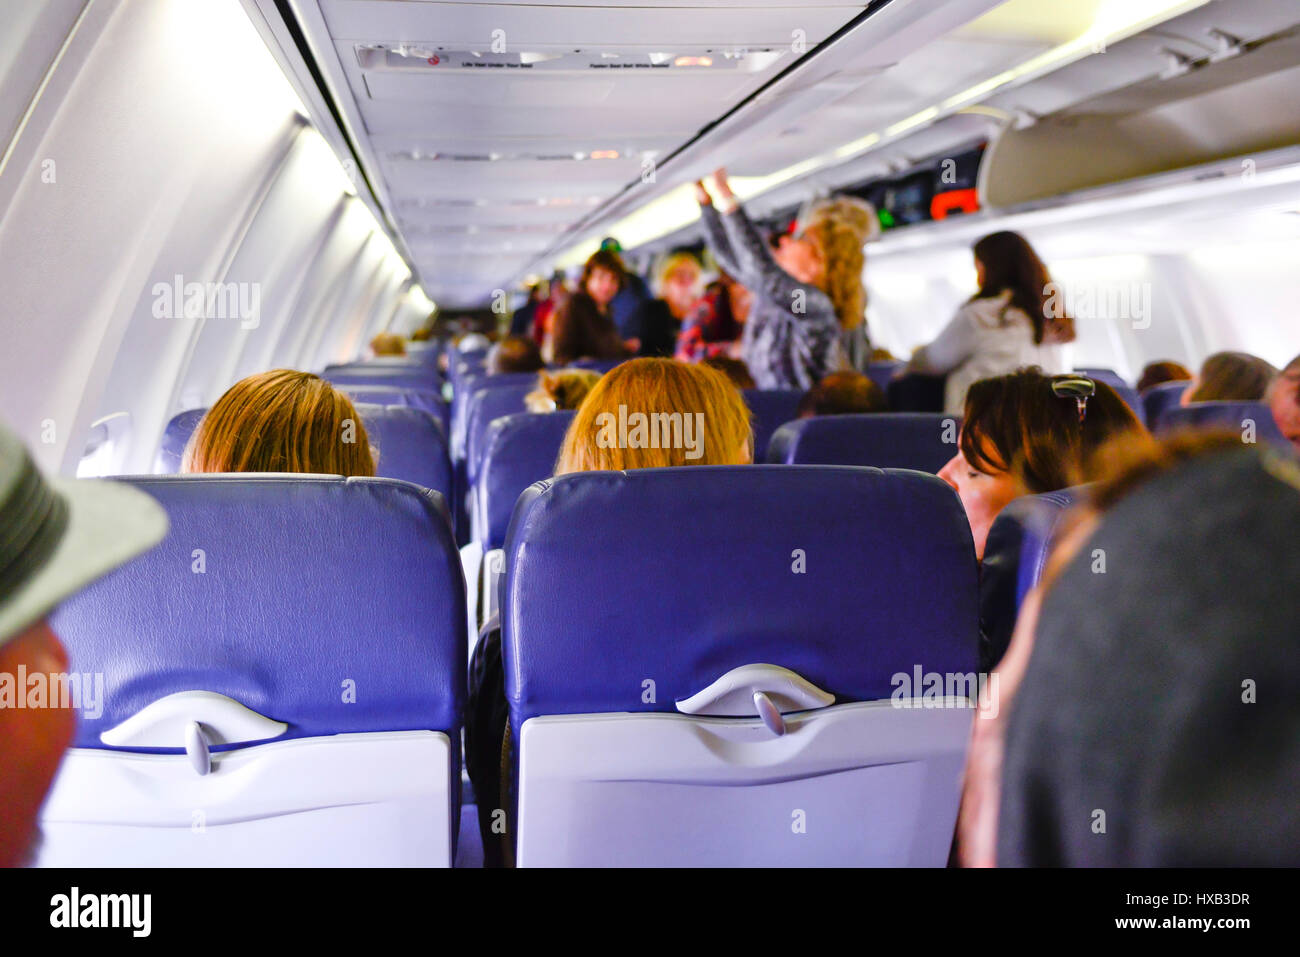 A view from the back of a commerical airplane of the cabin with people boarding, sitting & using overhead bins while flight attendants look on Stock Photo